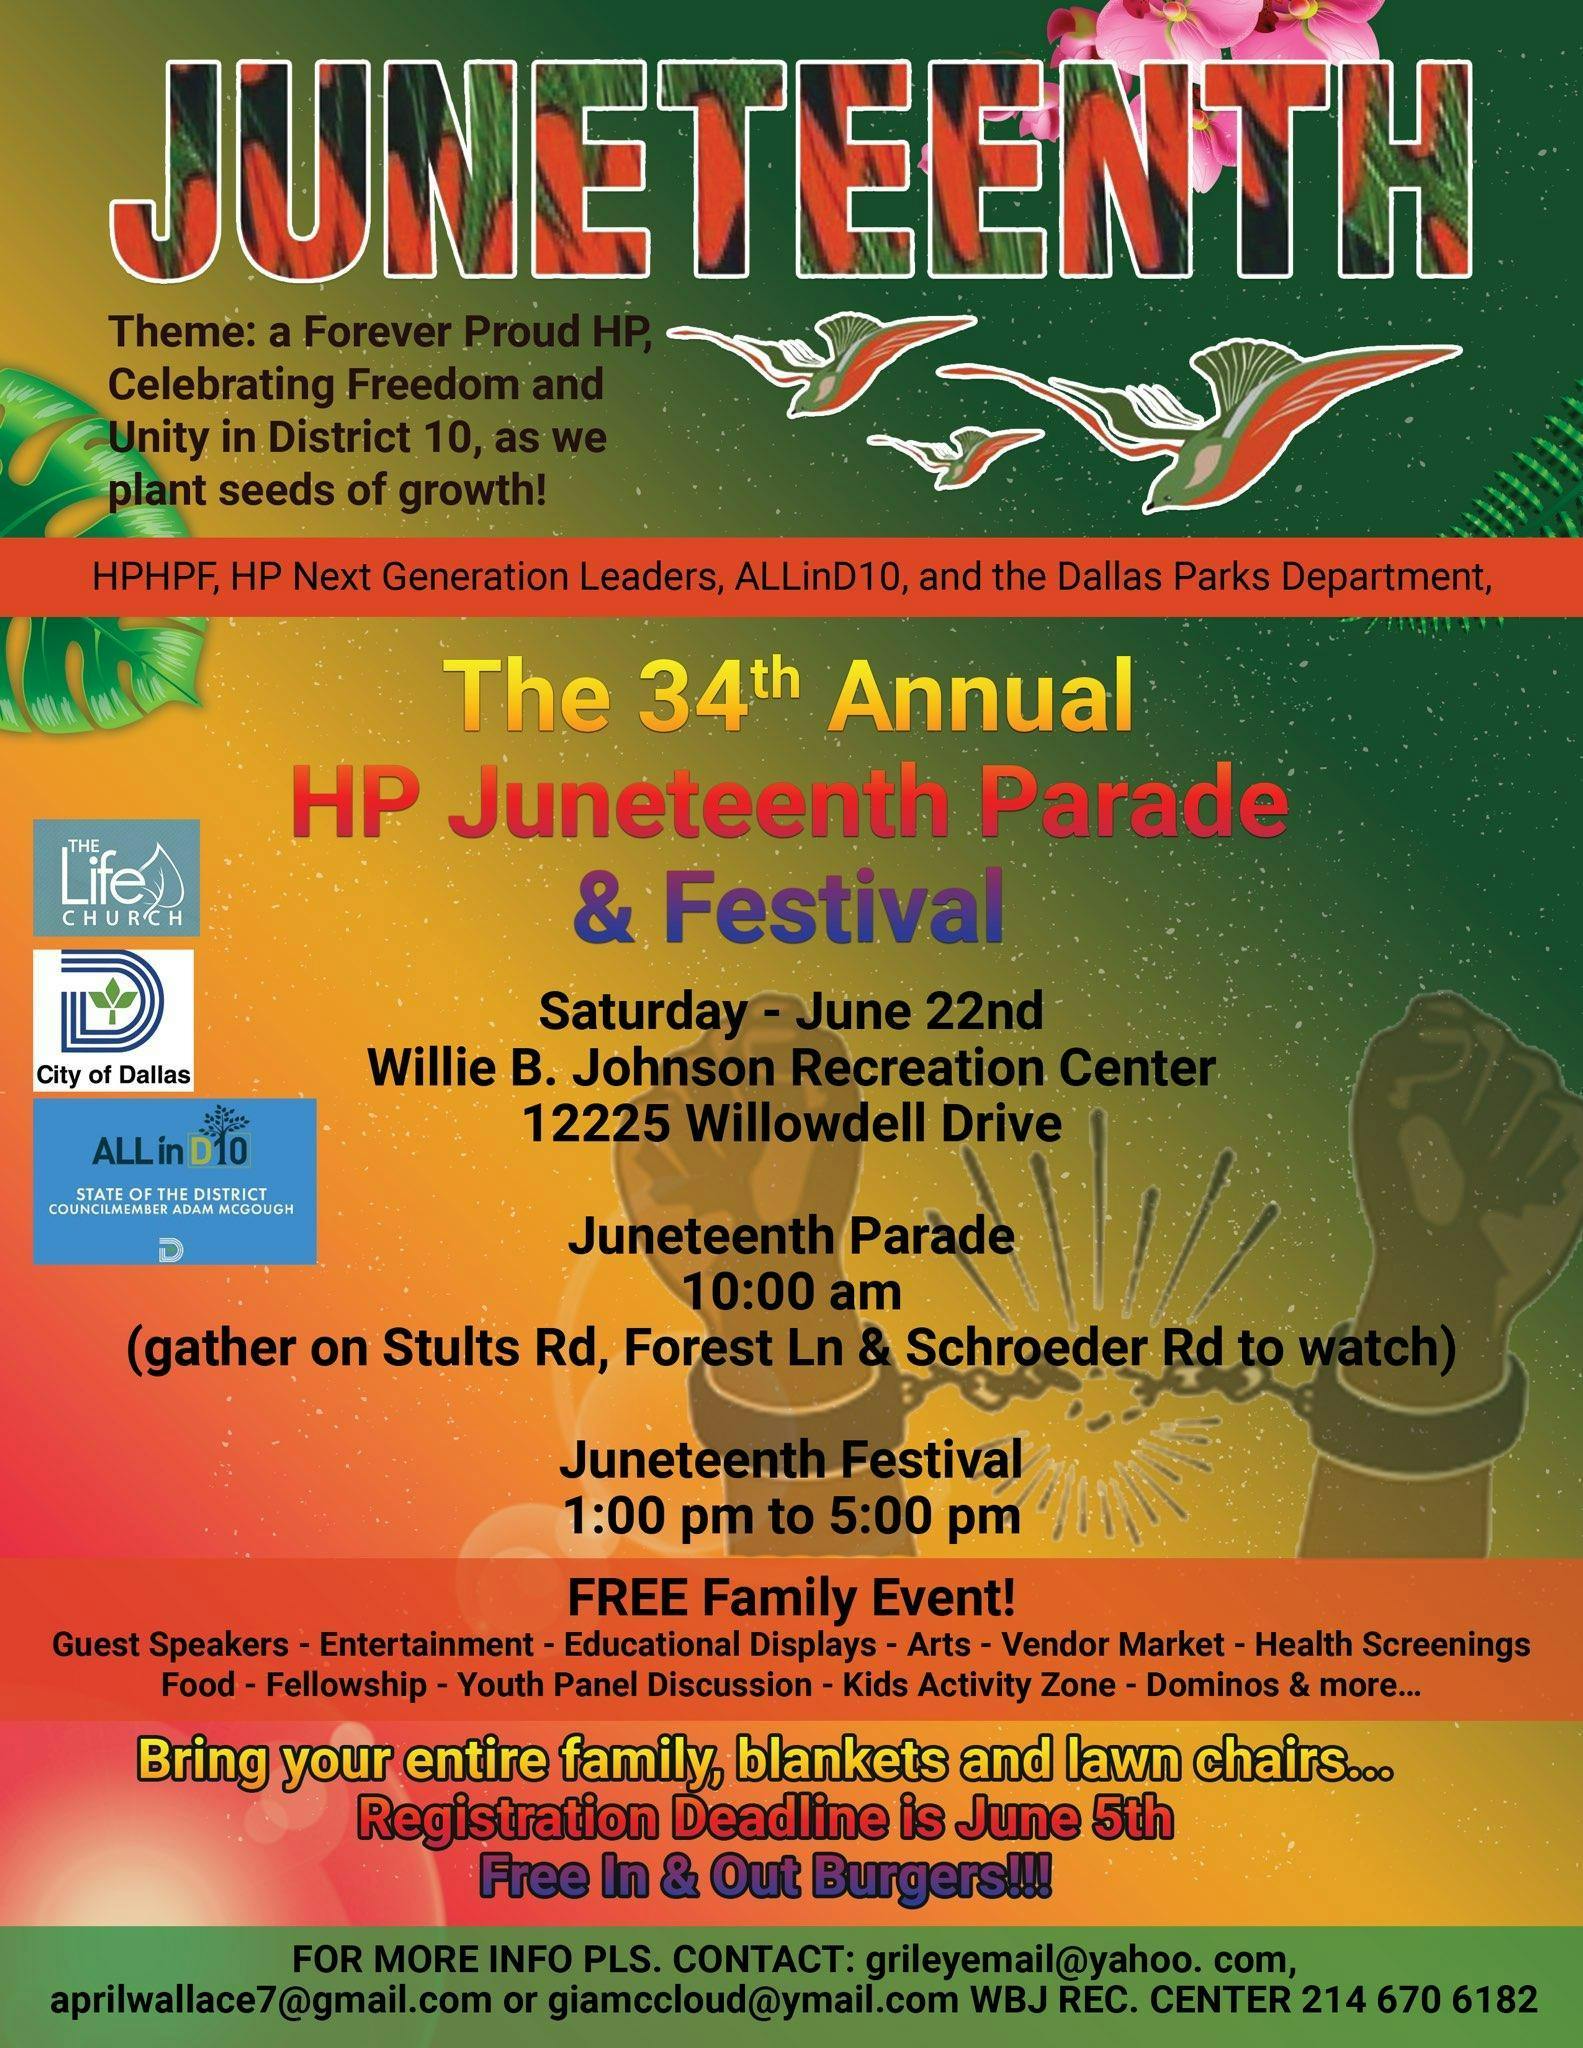  34th Annual Hamilton Park Juneteenth Parade and Festival 